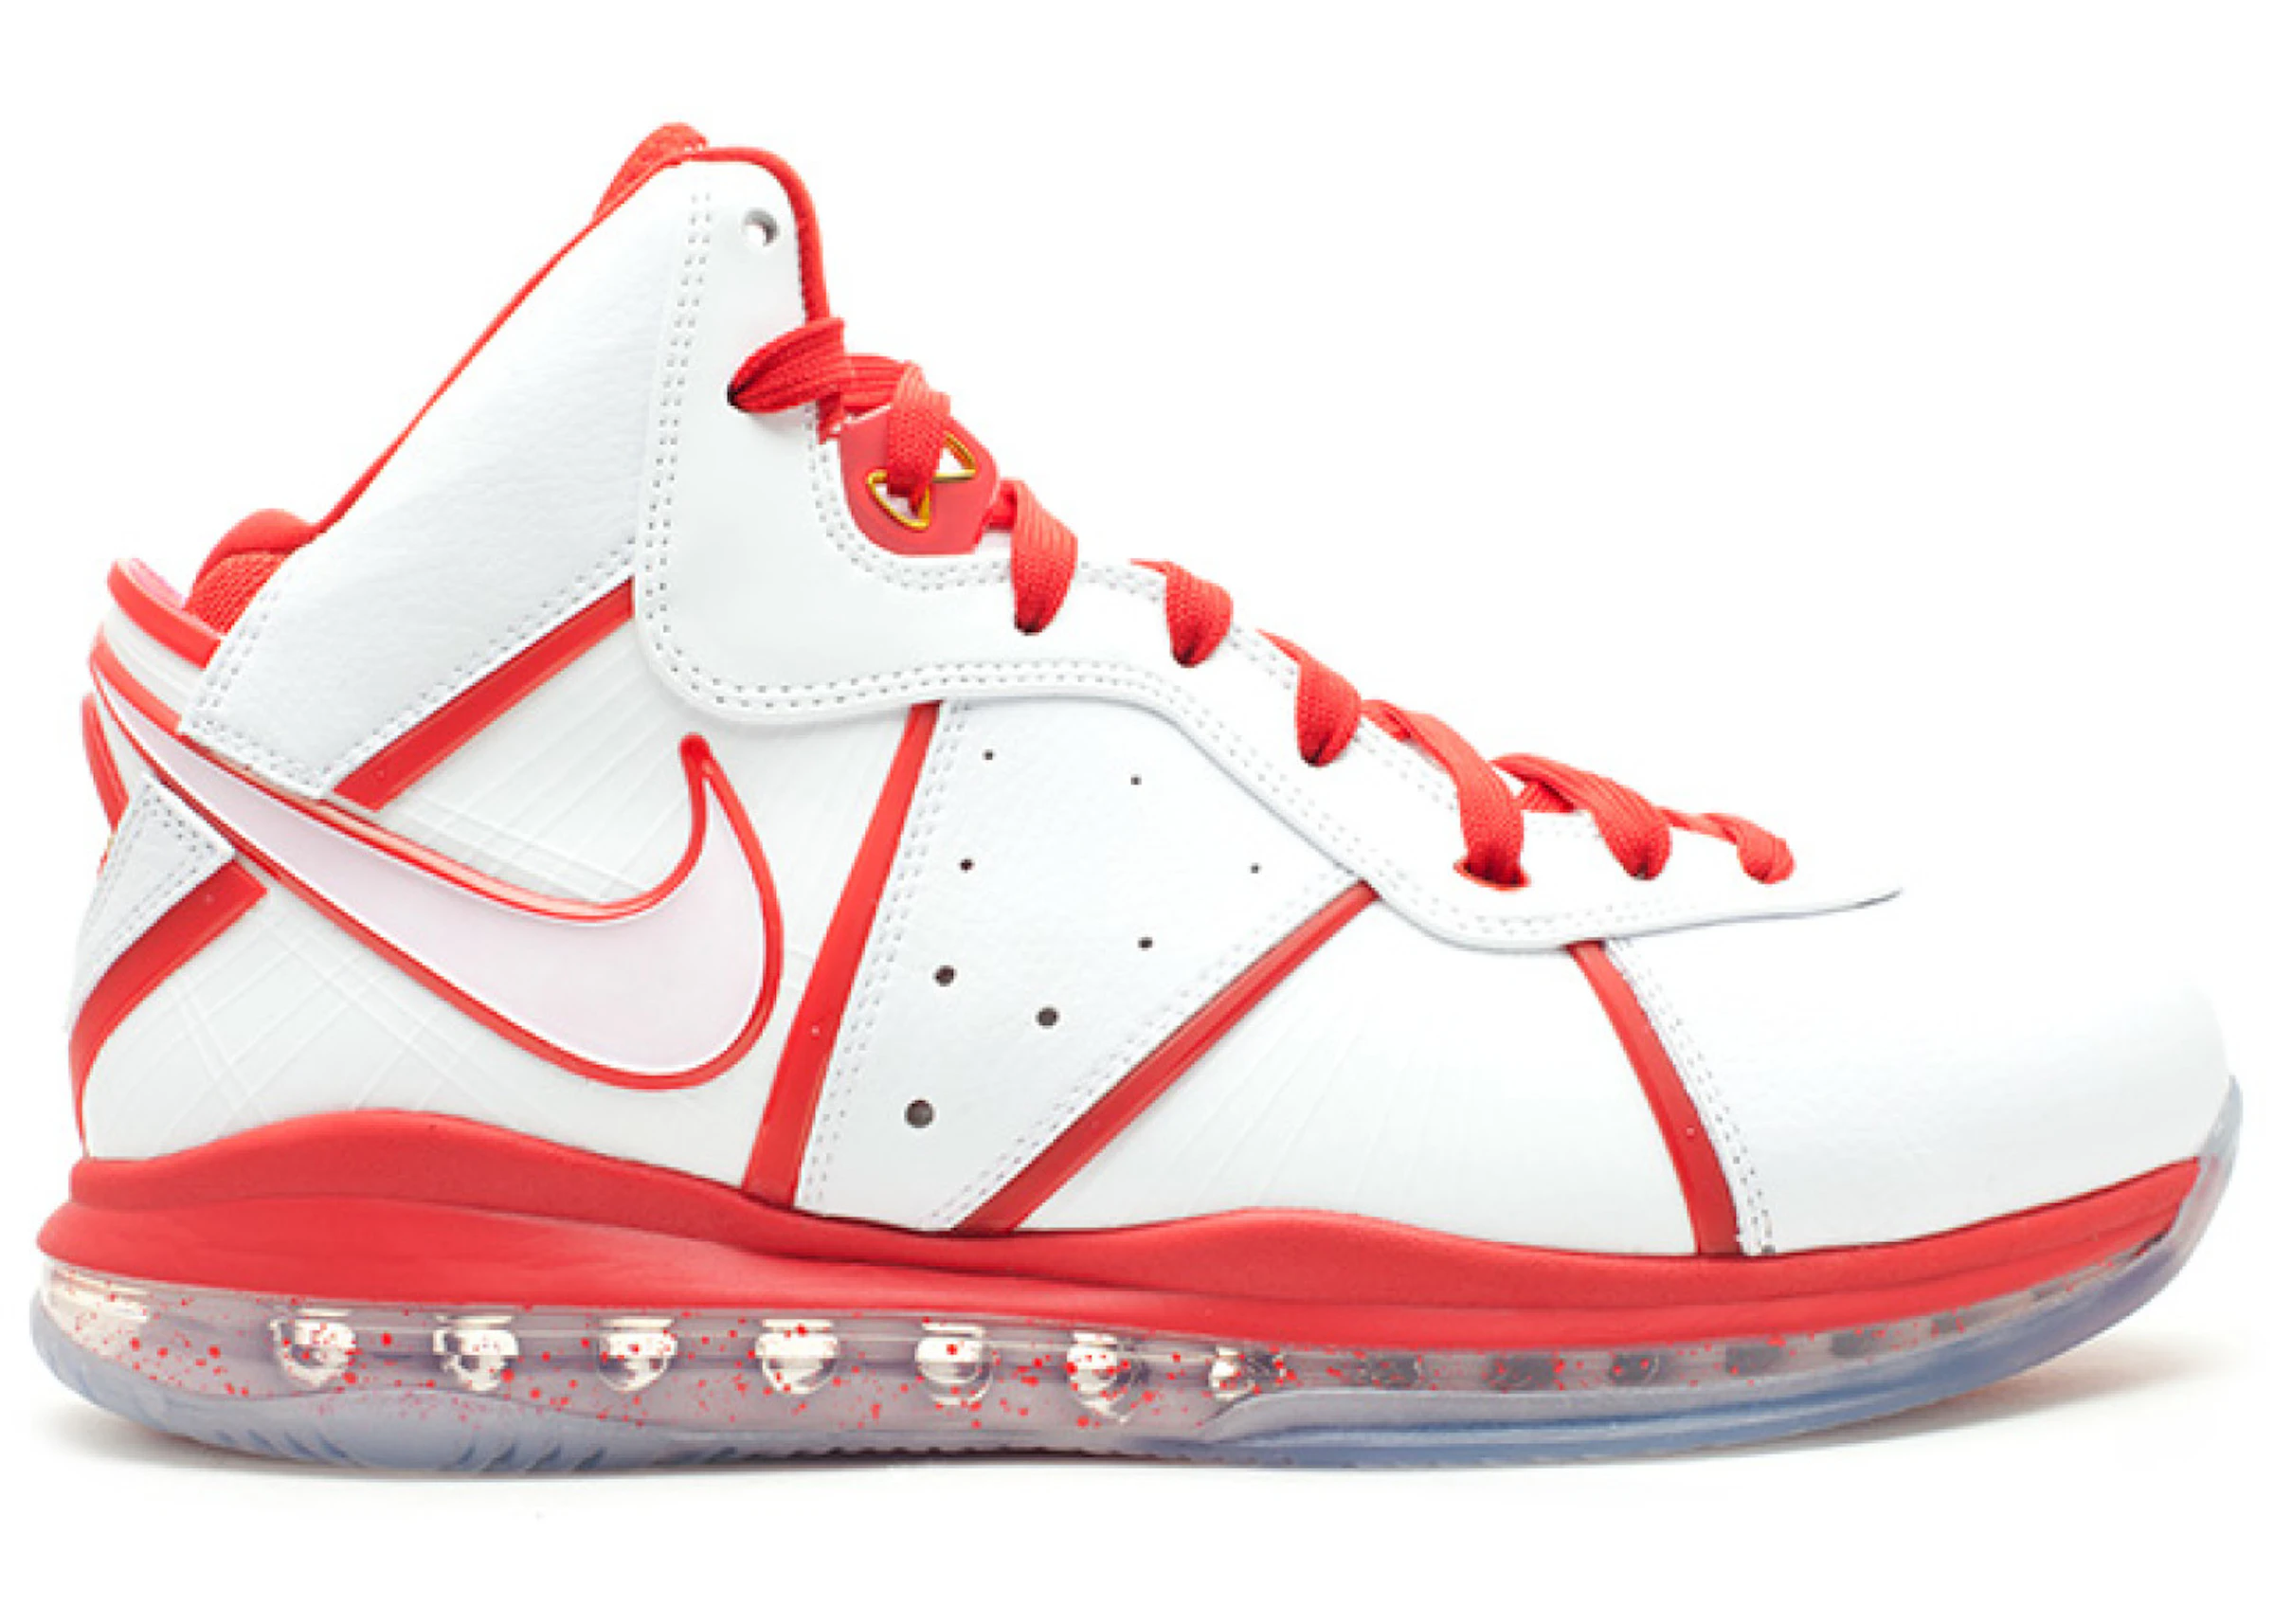 Buy Nike Lebron 8 Shoes & New Sneakers - Stockx